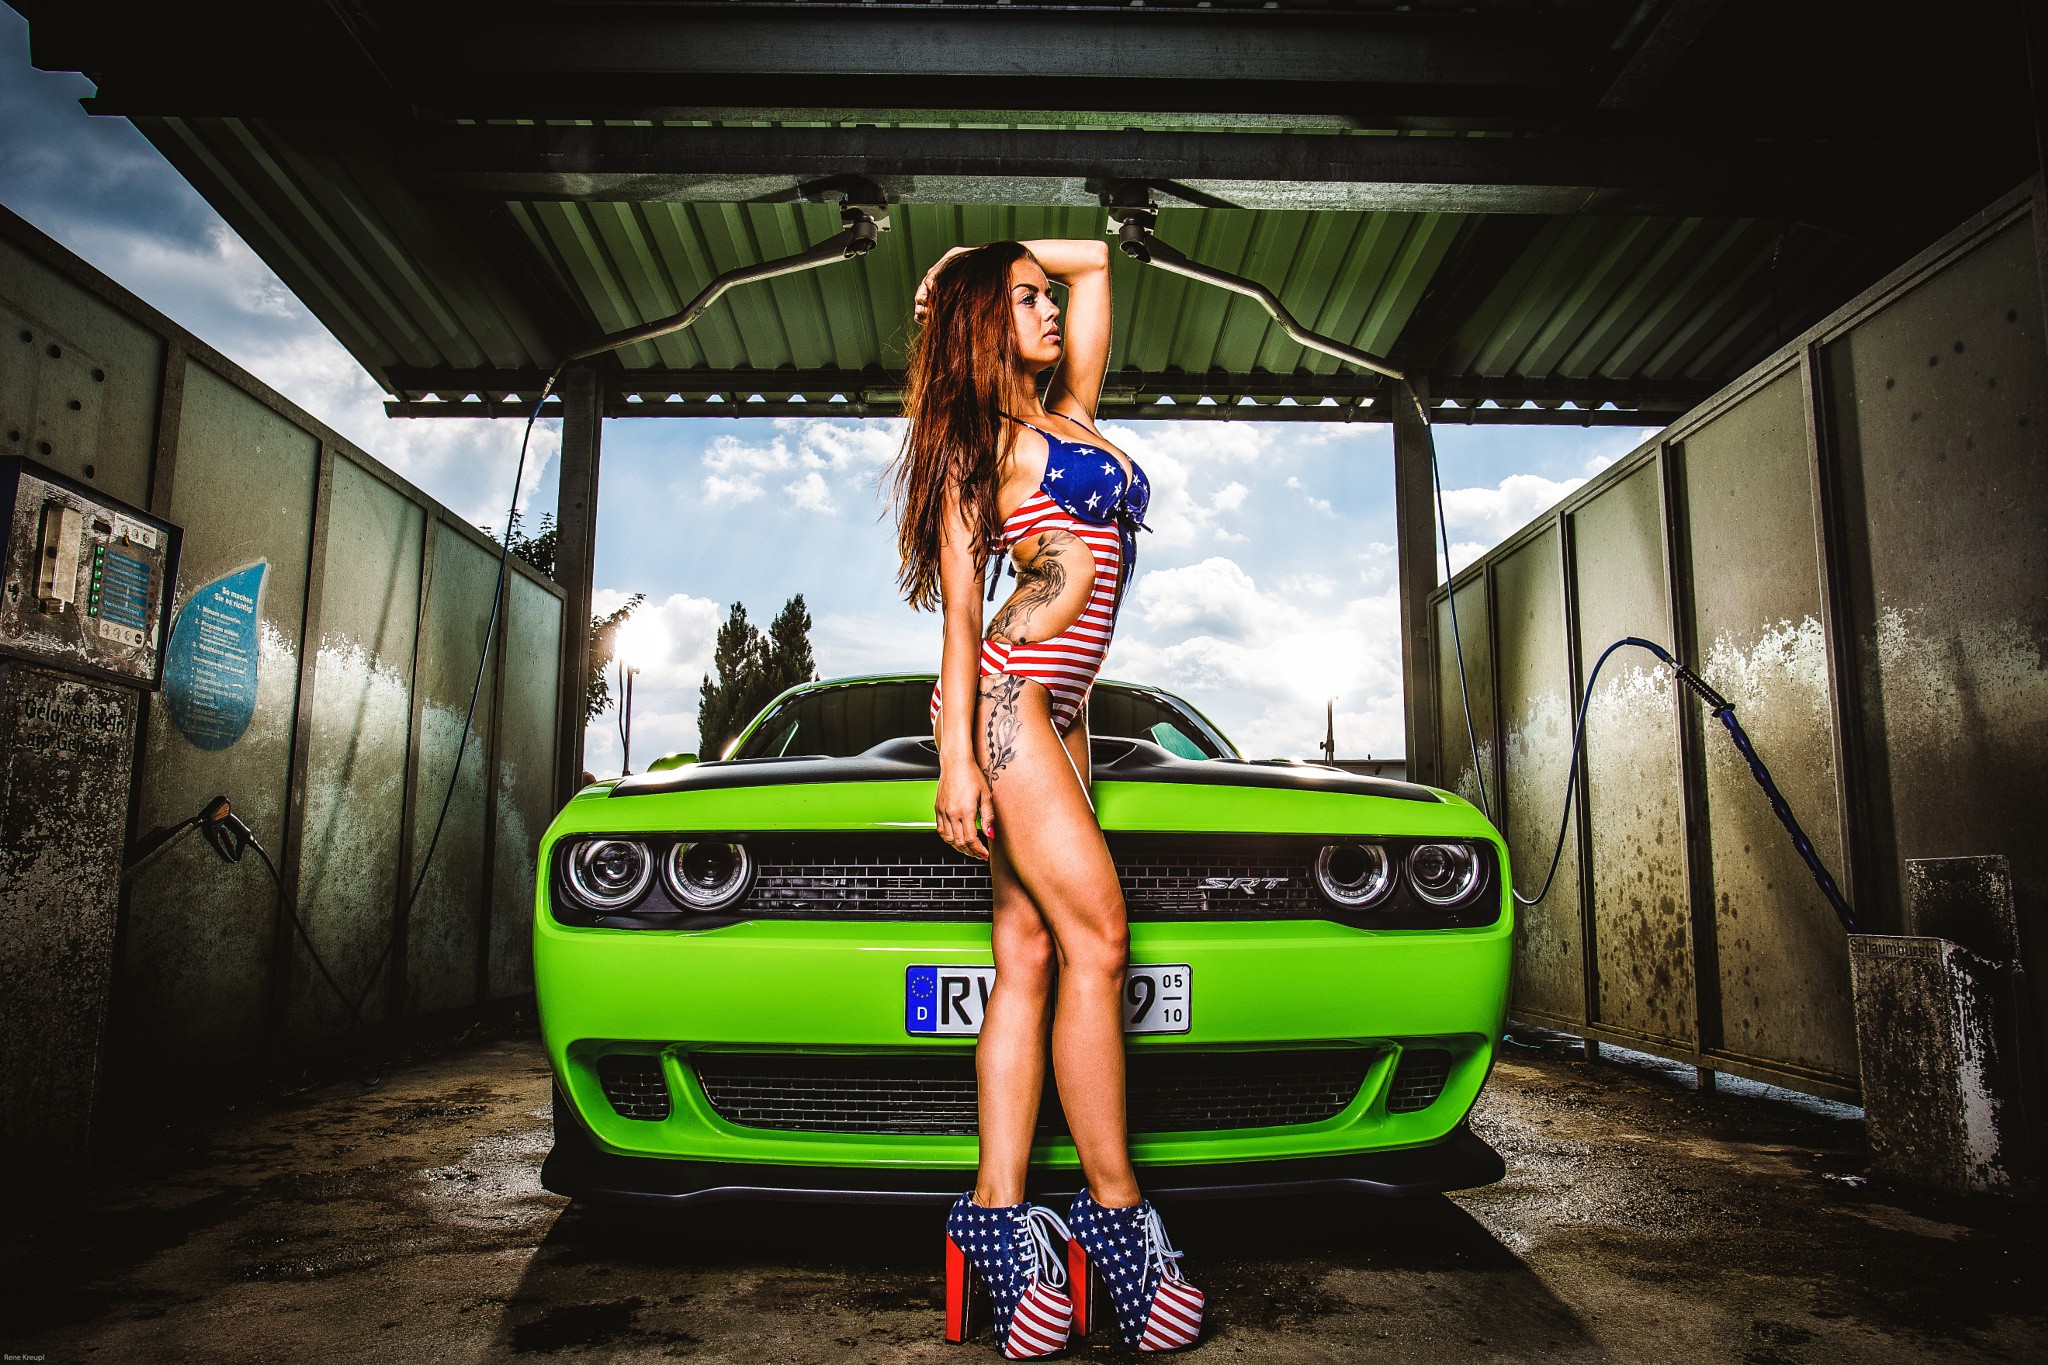 People 2048x1365 women brunette hands on head high heels tattoo car one-piece swimsuit looking away red nails platform high heels women with cars vehicle Dodge Dodge Challenger legs inked girls standing long hair swimwear flag American flag green cars